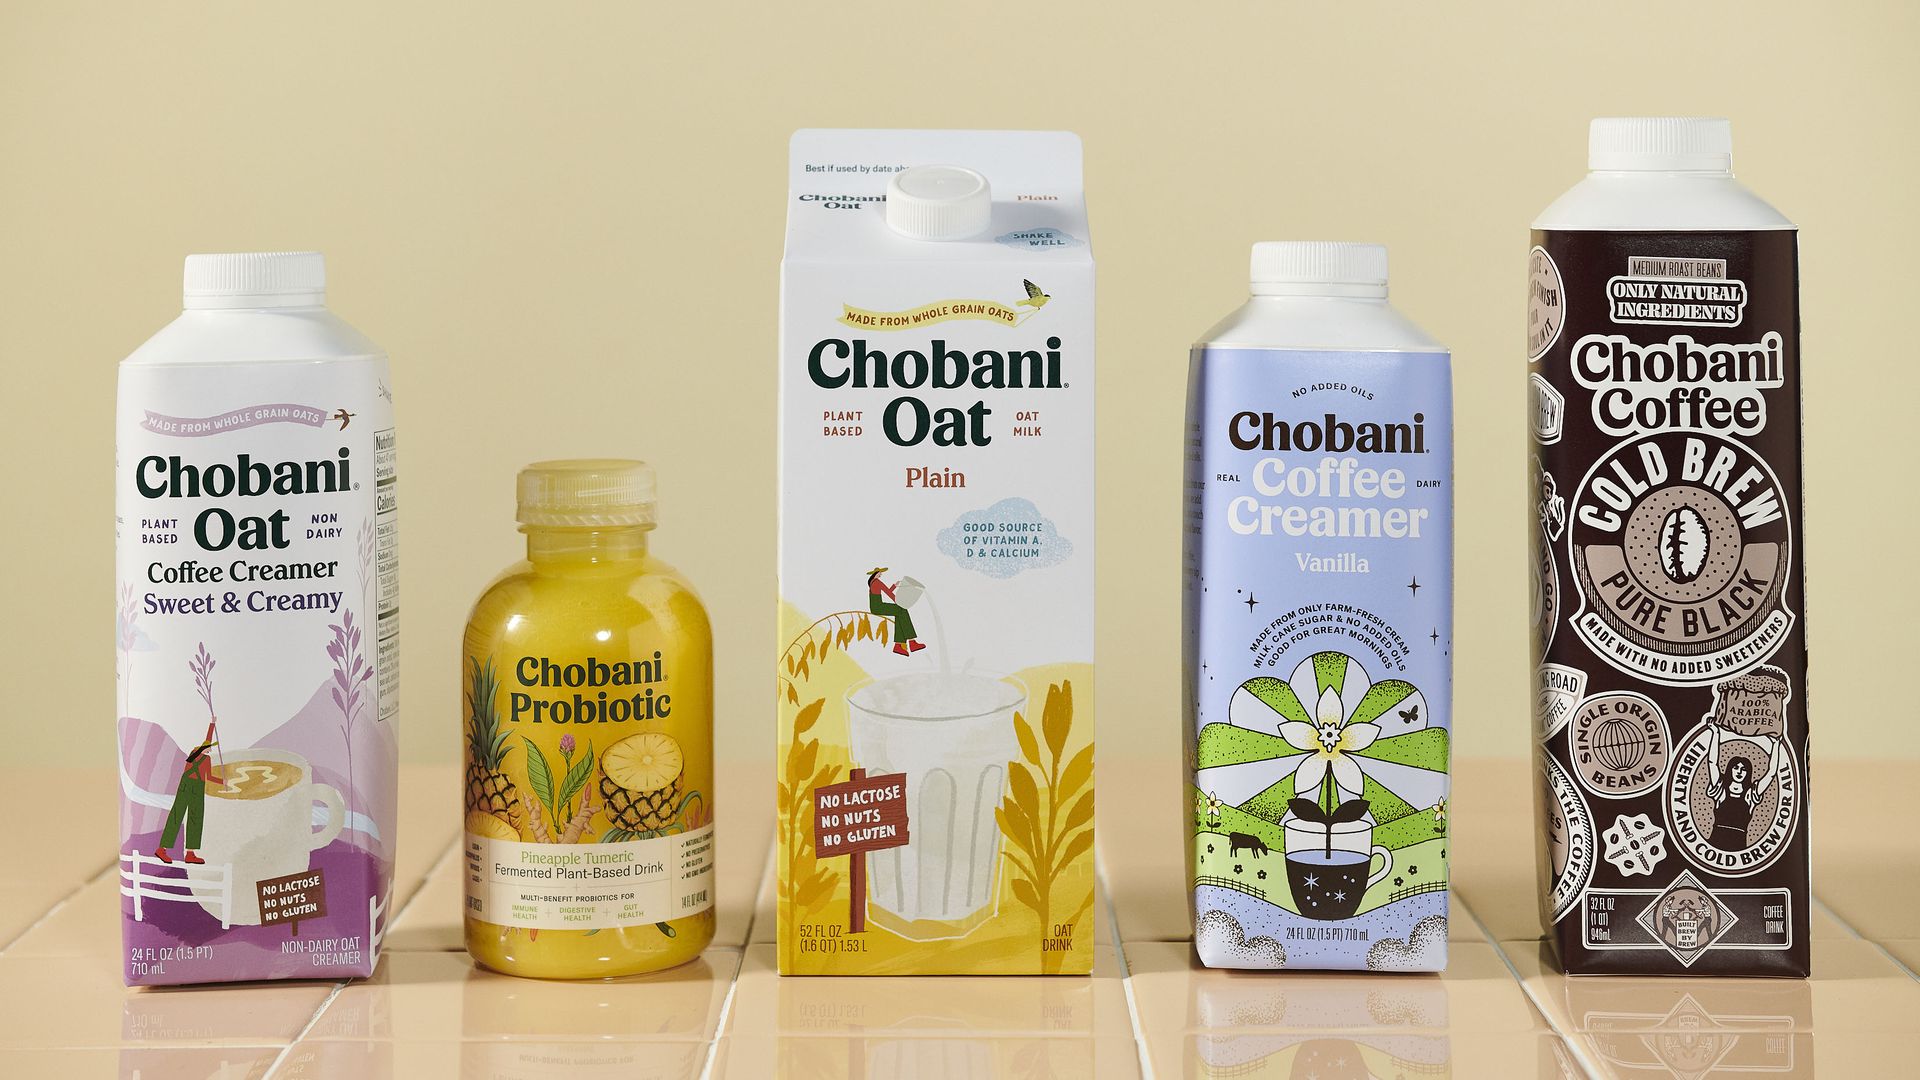 Chobani's more recently launched product offerings include oat milk and creamer.